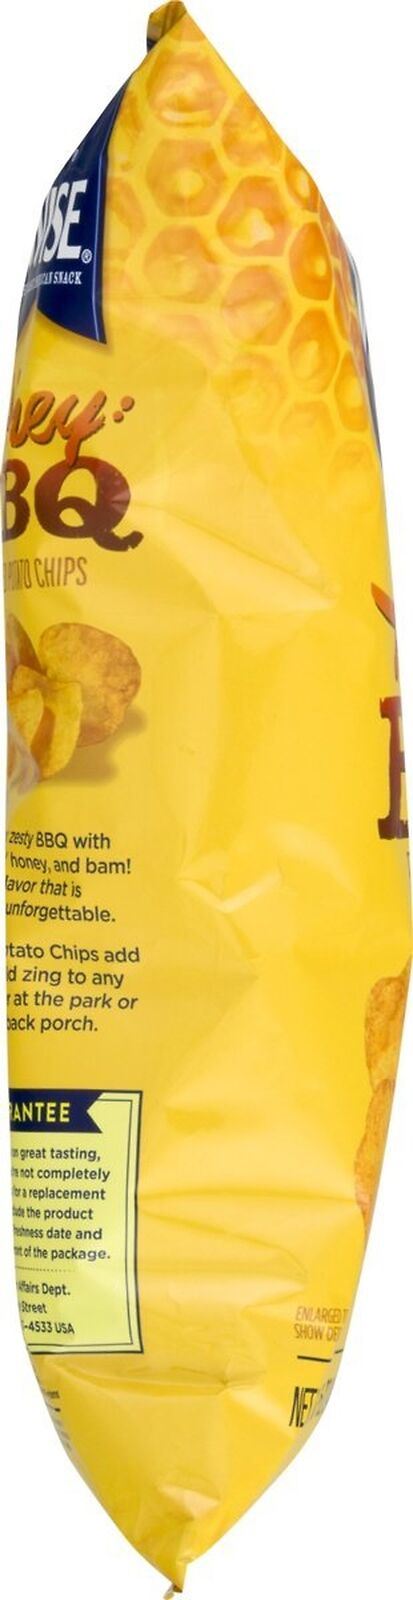 Wise Foods Honey BBQ Potato Chips, 4-Pack 7.5 oz. Bags